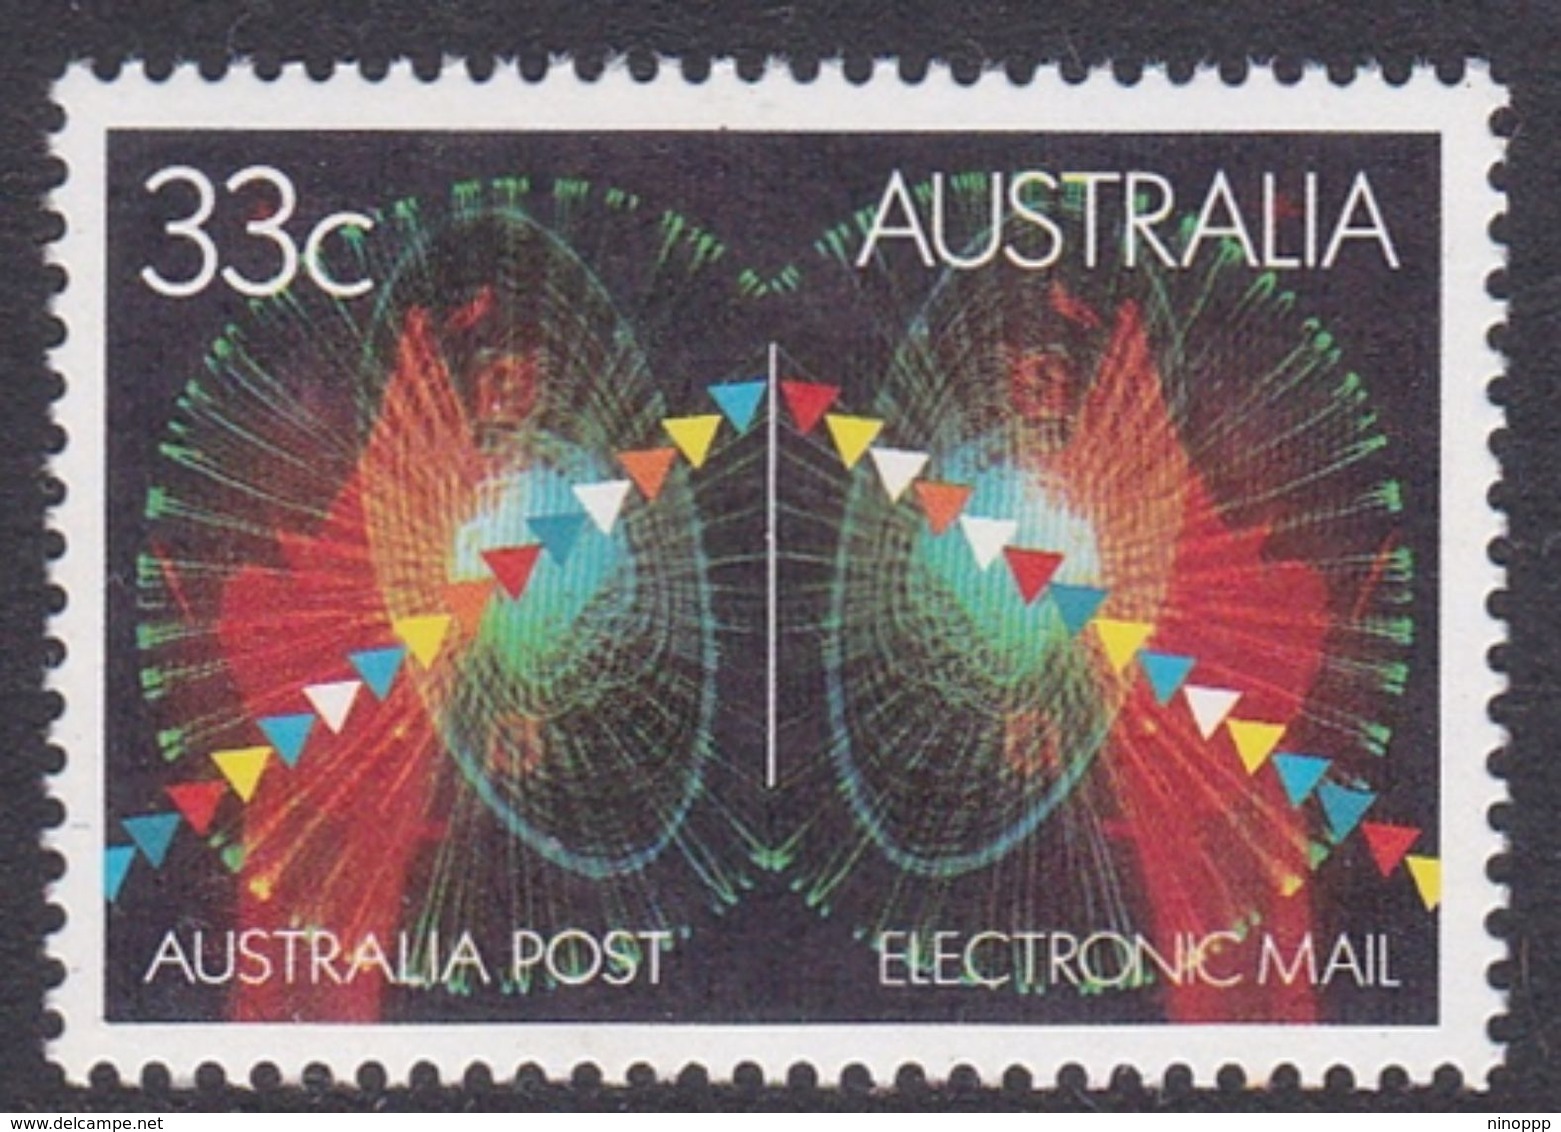 Australia ASC 989 1985 Electronic Mail, Mint Never Hinged - Mint Stamps